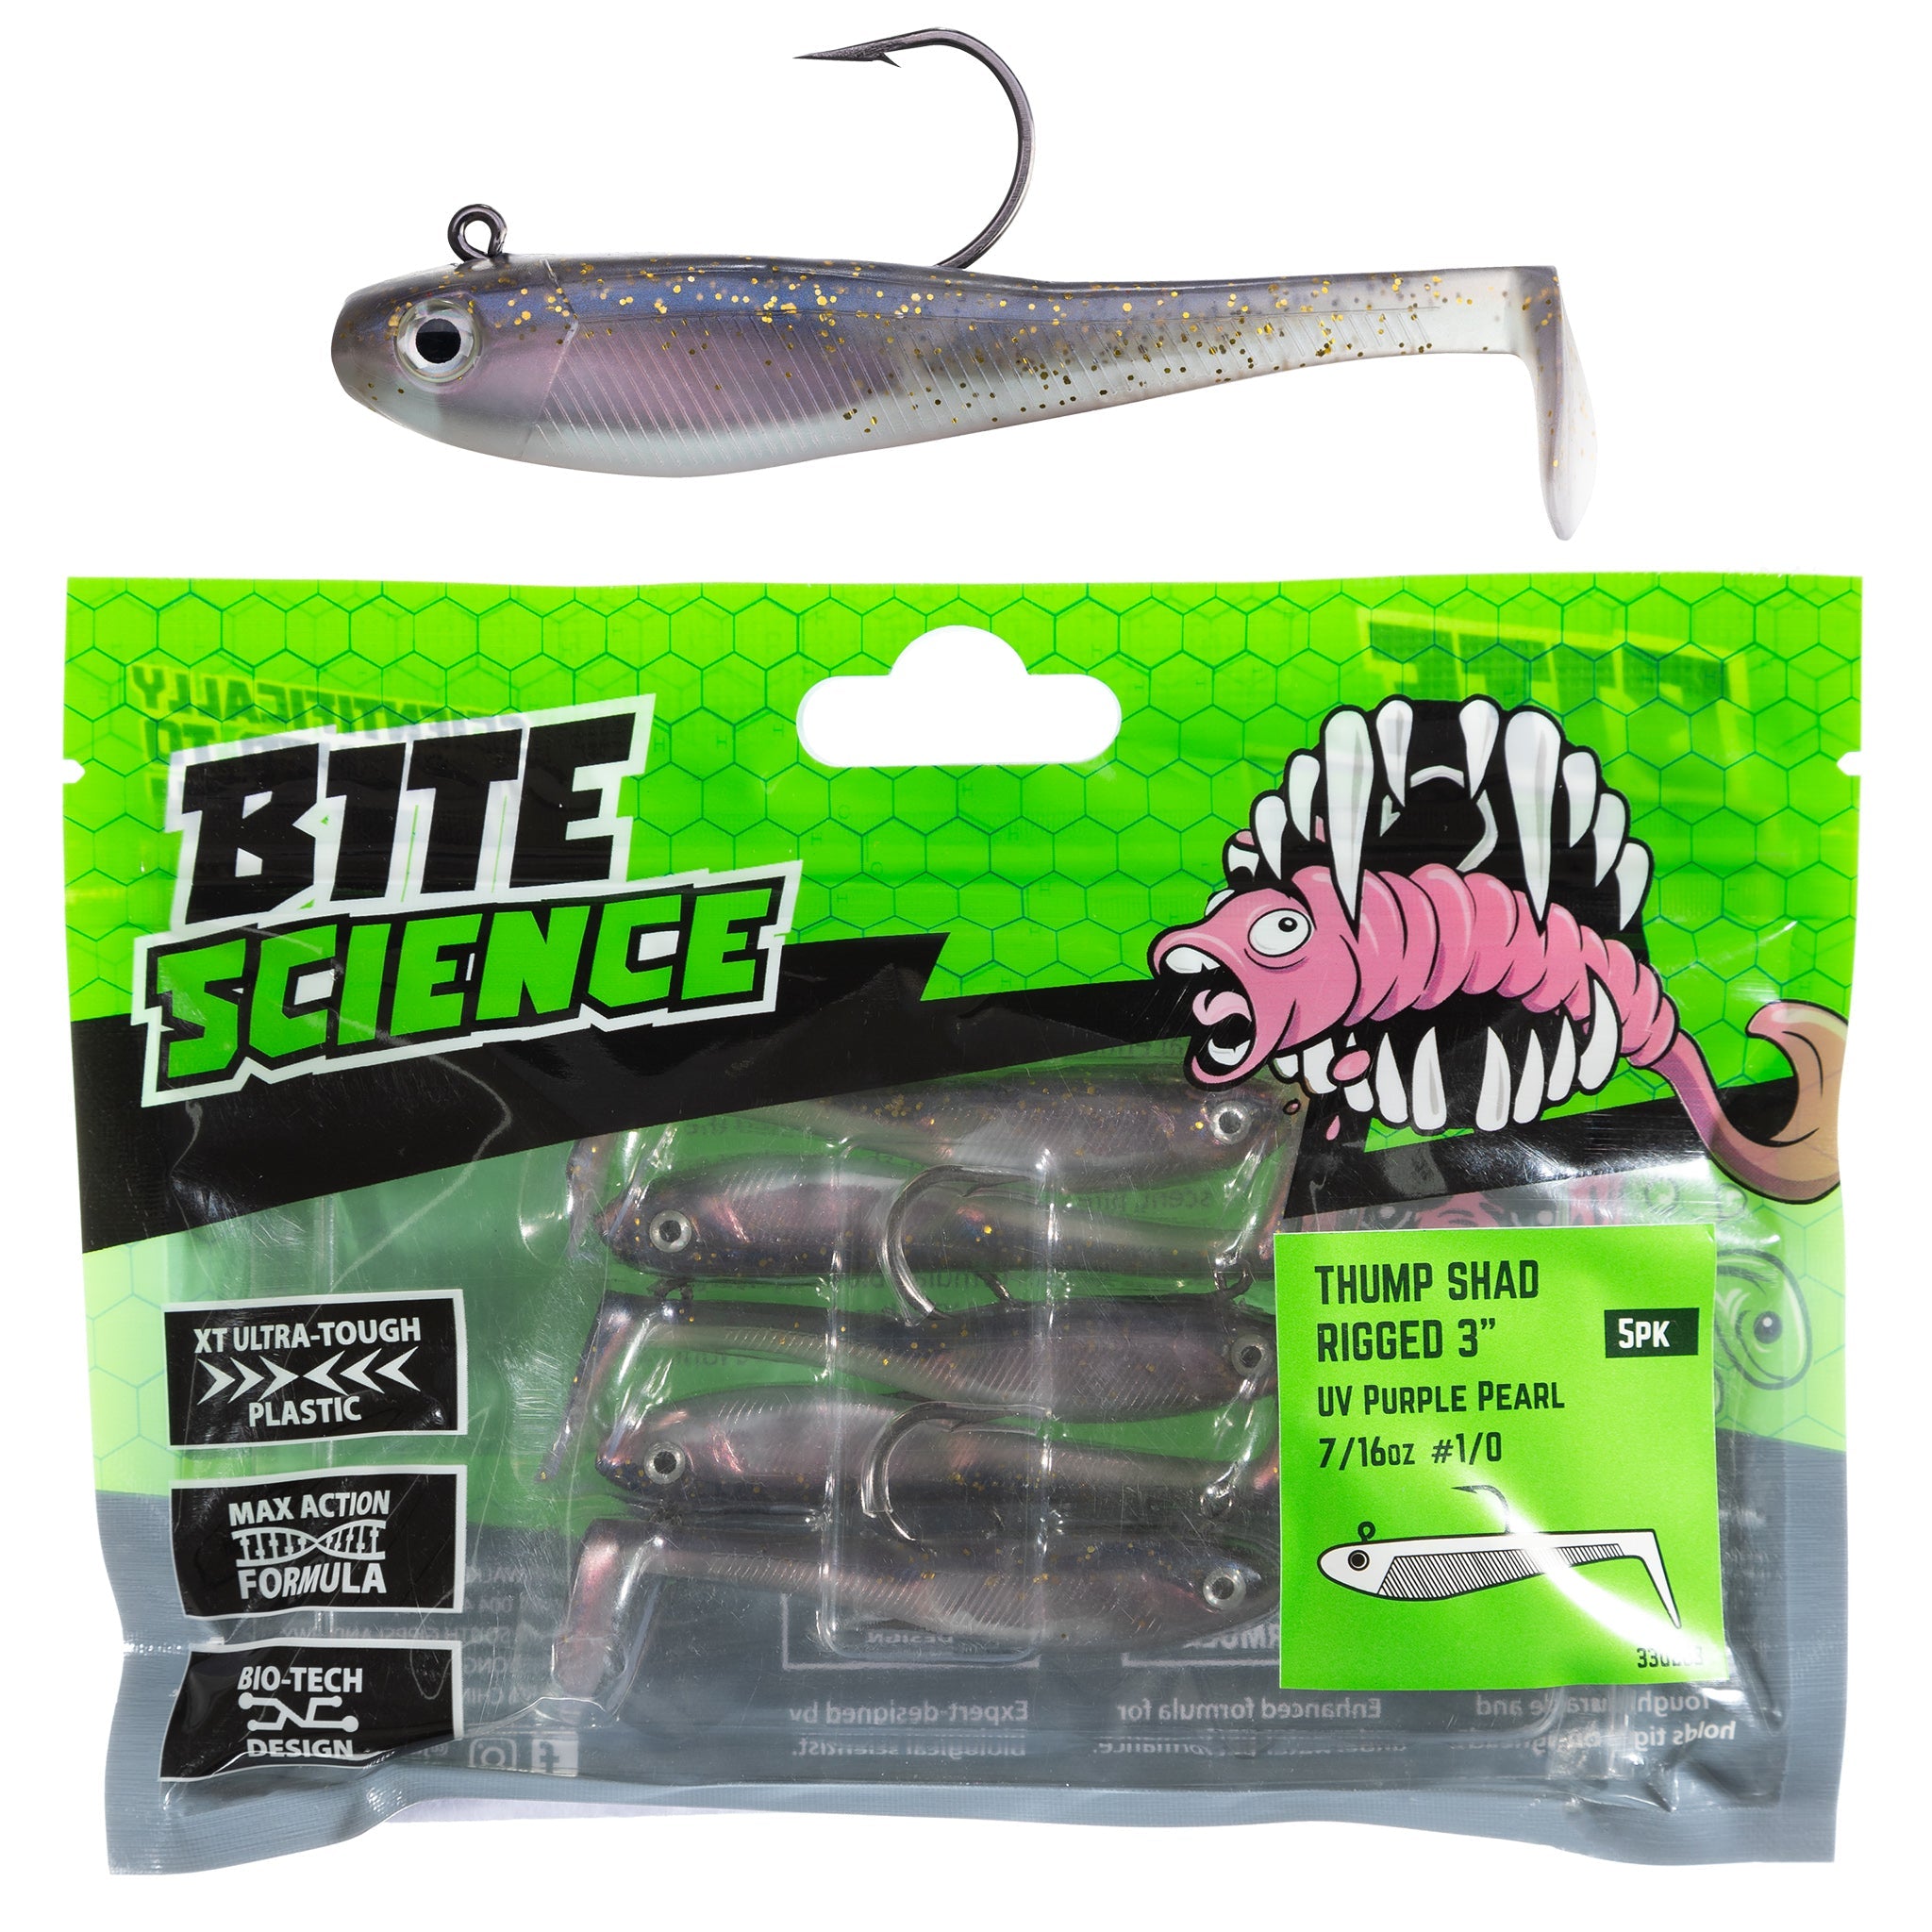 Bite Science Thump Shad Rigged Soft Plastic Lures – Jarvis Walker